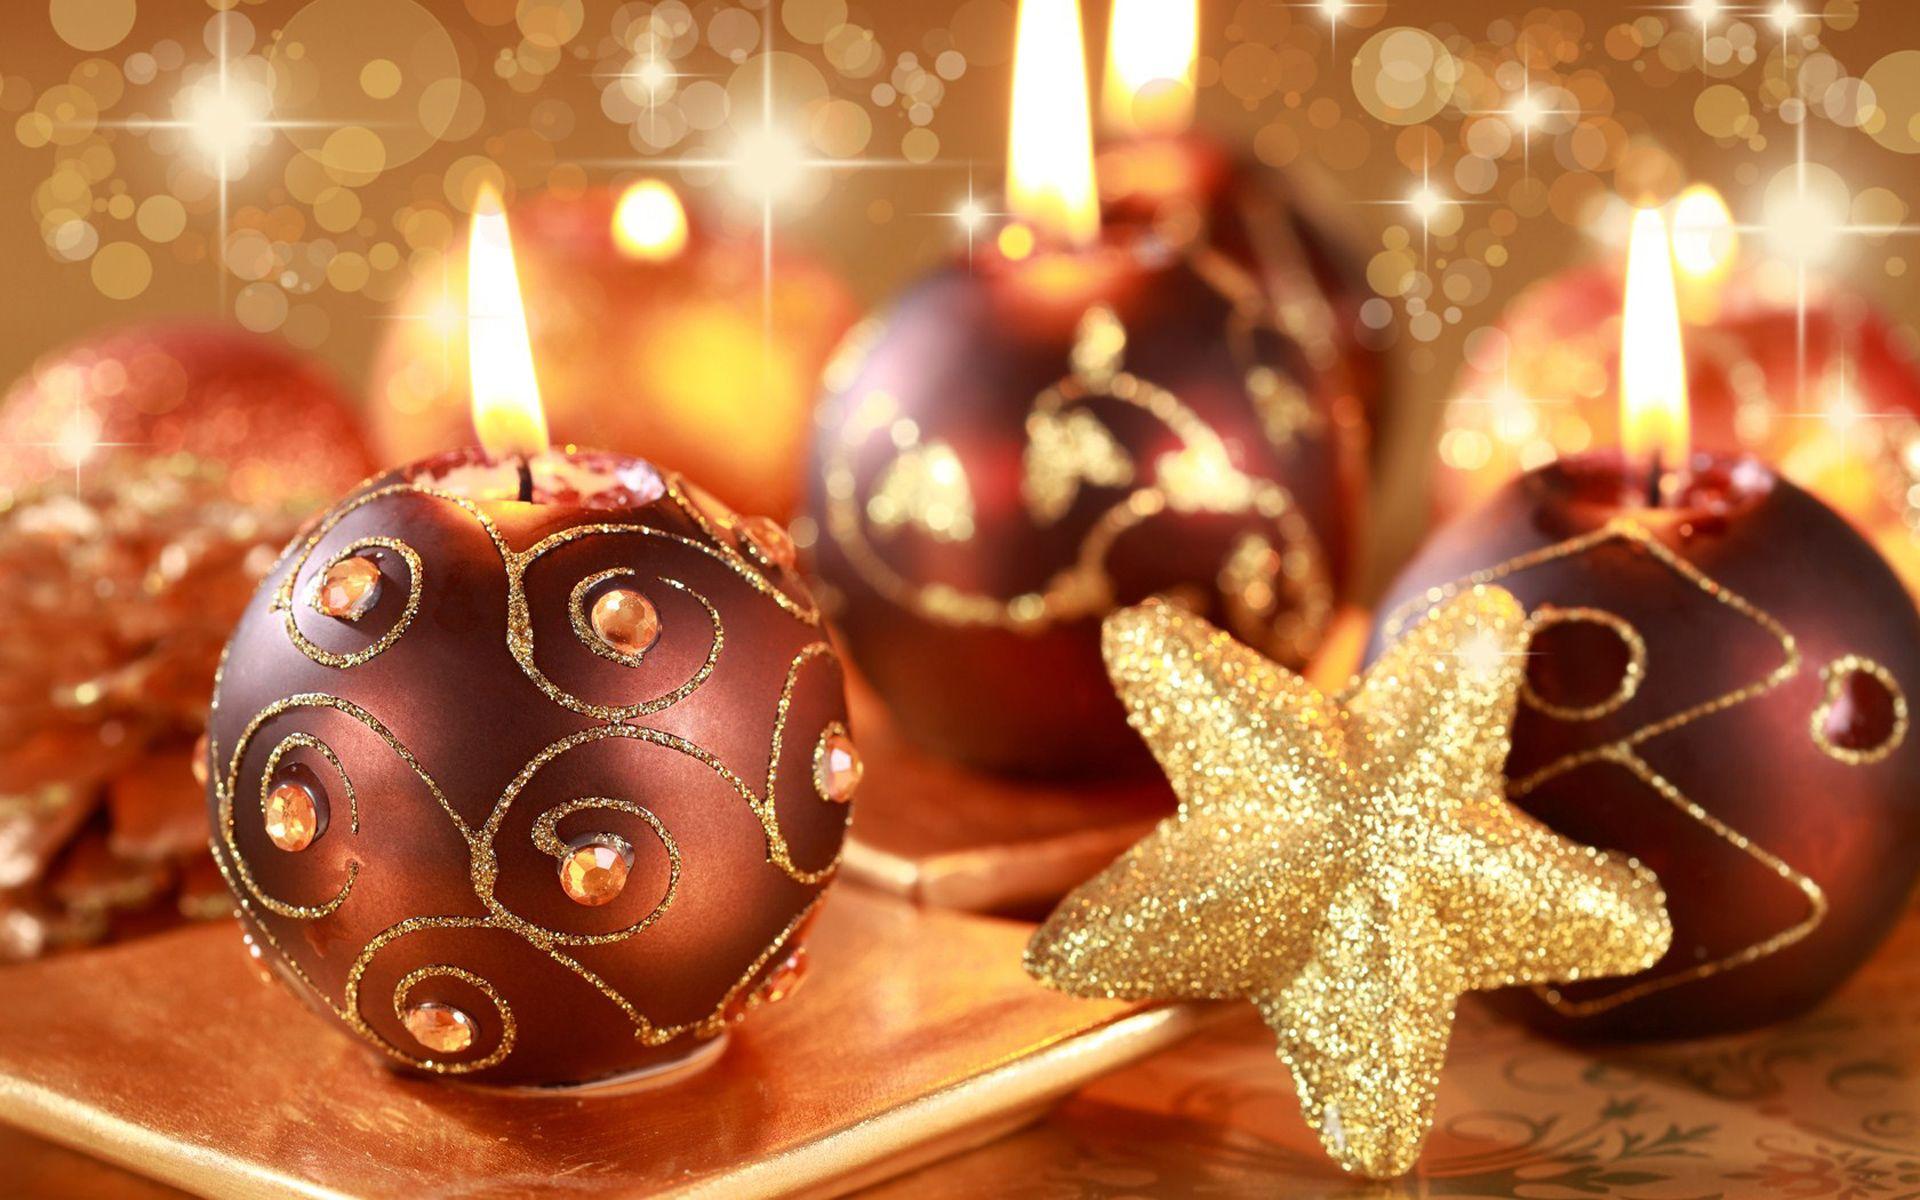 Lovely Christmas Candles Wallpaper 41083 1920x1200 px